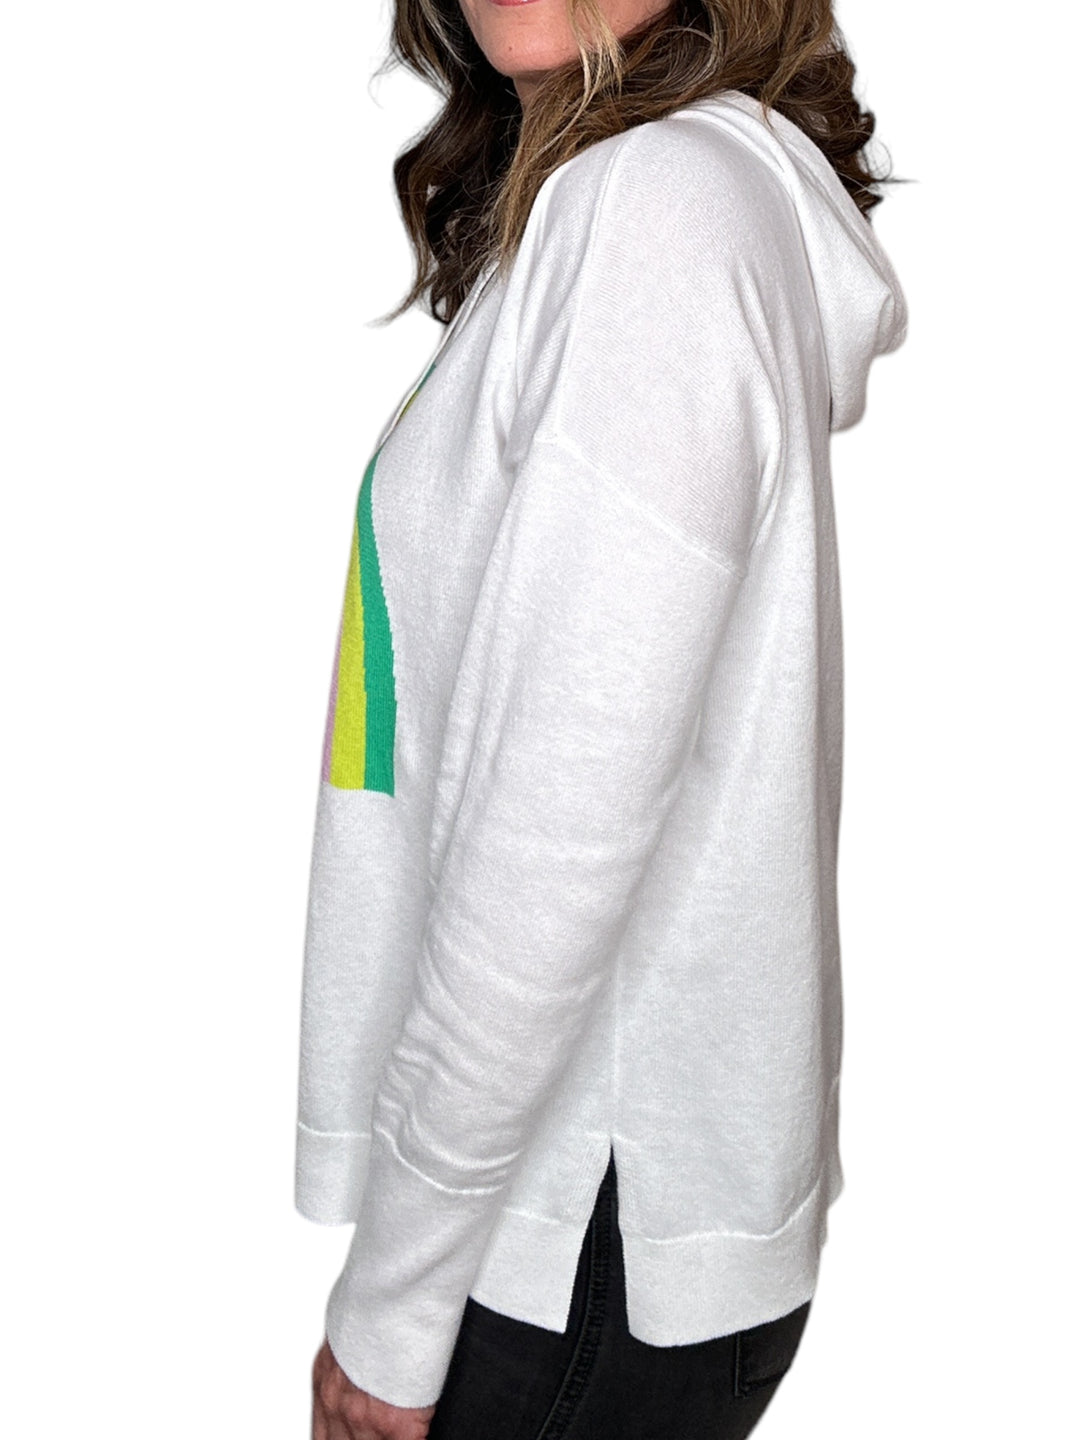 LOVE HOODIE SWEATER-WHITE - Kingfisher Road - Online Boutique